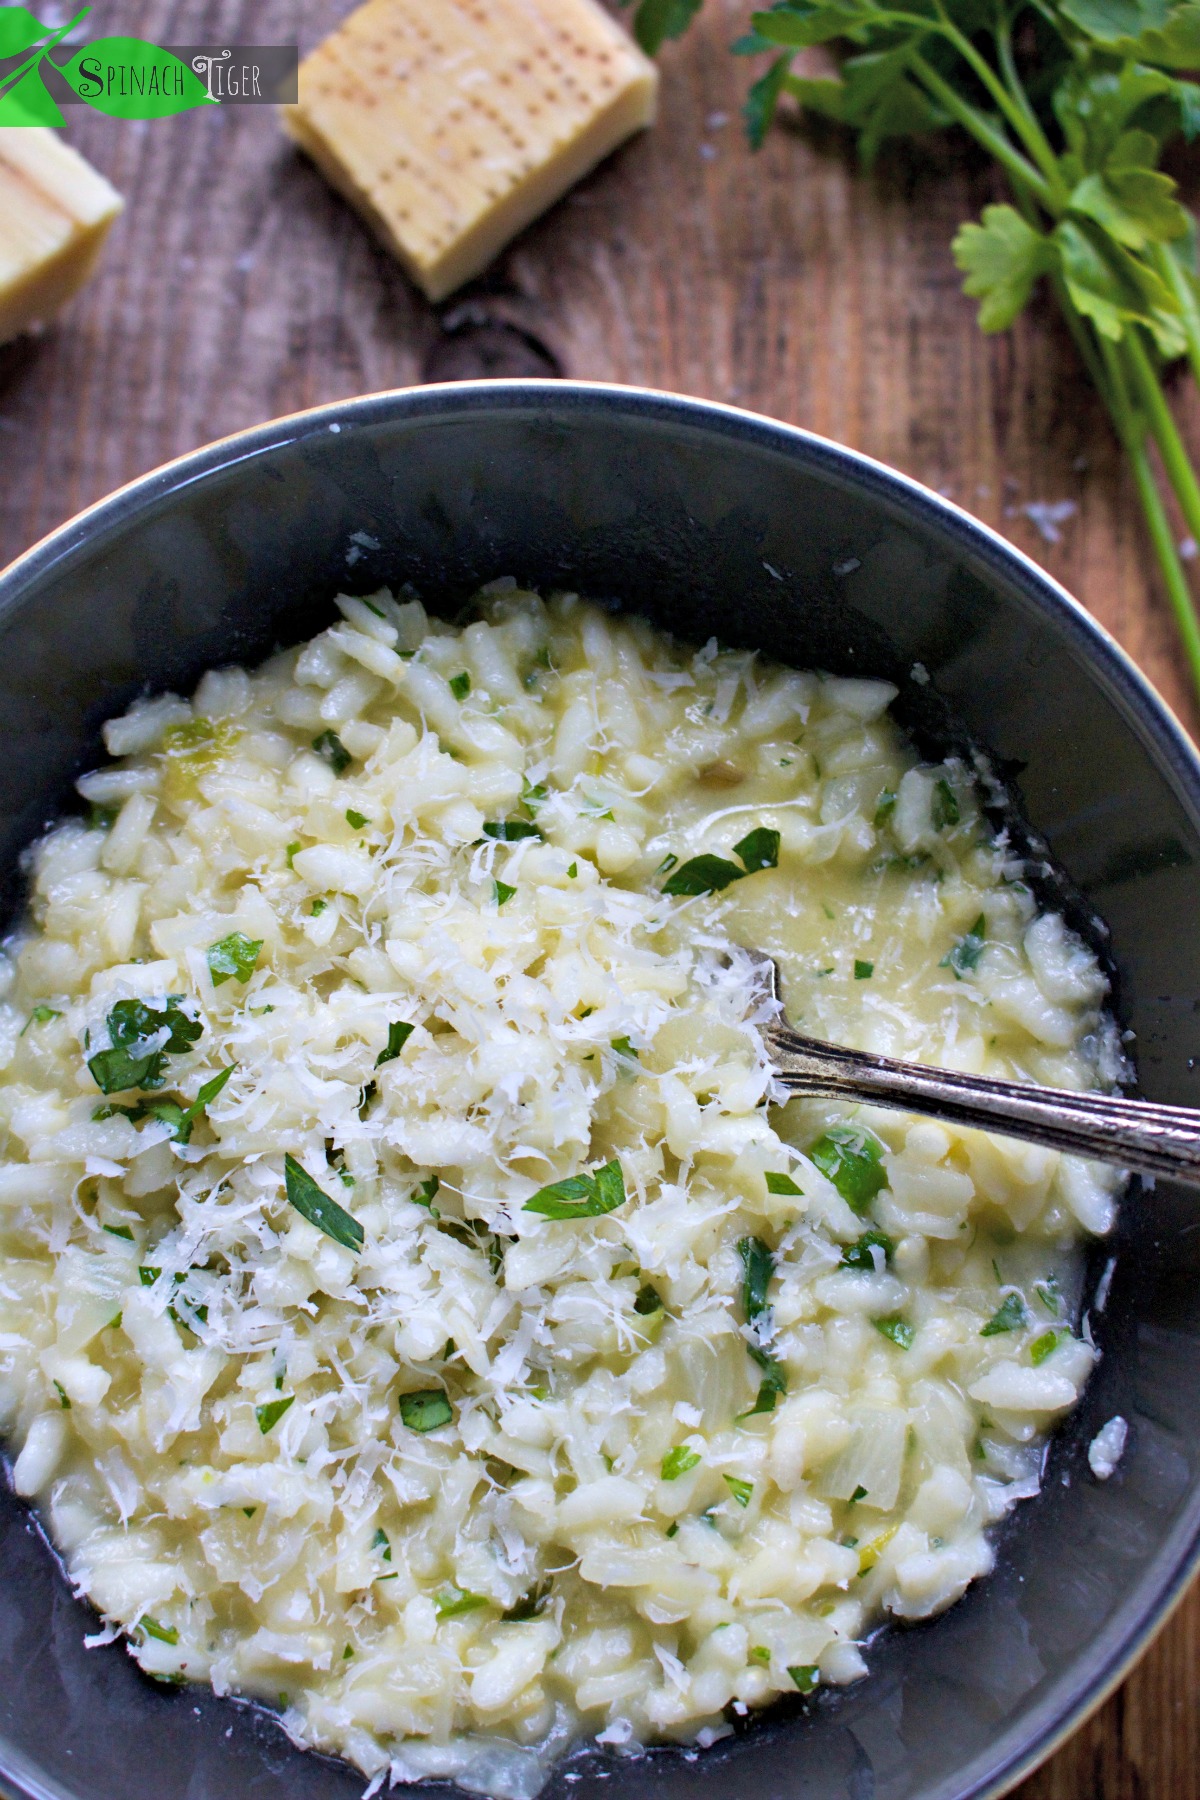 How to Make Perfect Risotto and Necessary Tips from Spinach Tiger #risotto